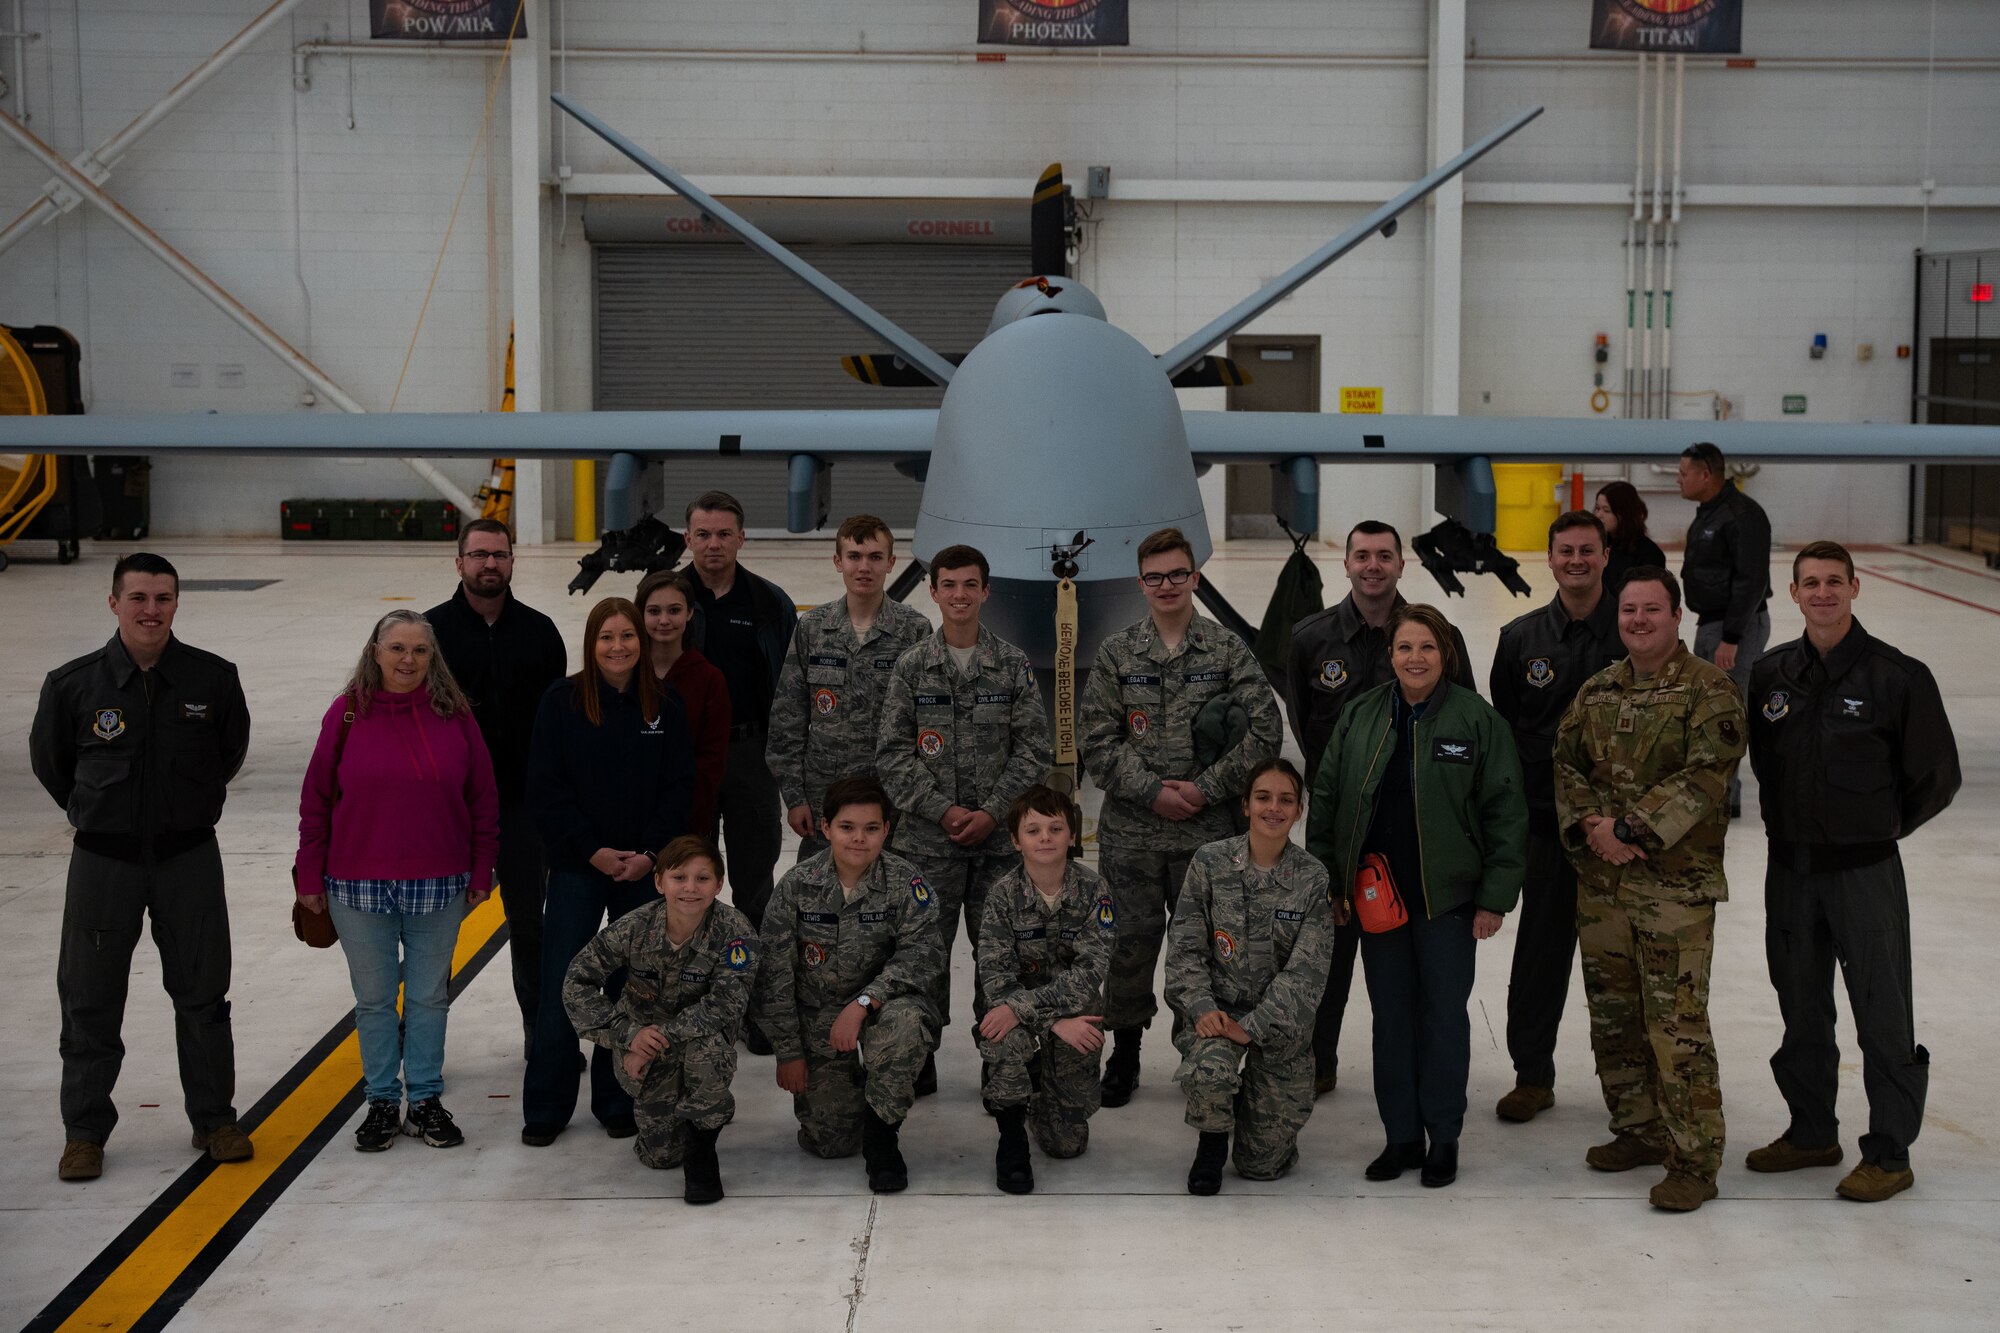 A group of adults and young adults in a mixture of military uniform and casual civilian attire pose in front of a military aircraft while inside an aircraft hangar for a group photo.